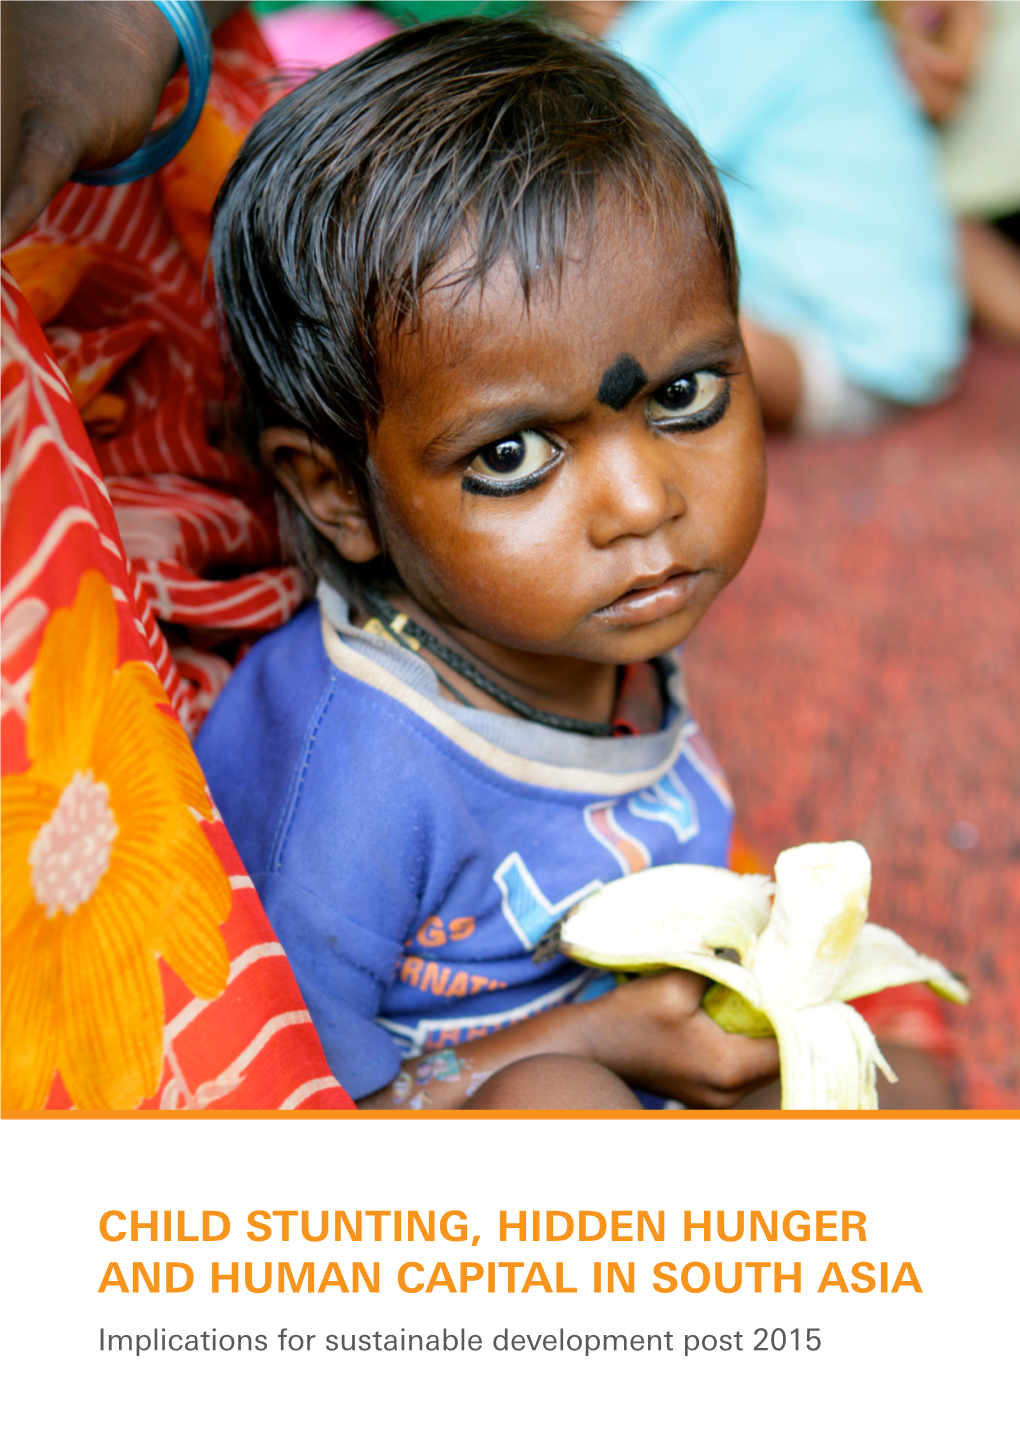 CHILD STUNTING, HIDDEN HUNGER and HUMAN CAPITAL in SOUTH ASIA Implications for Sustainable Development Post 2015 Contributors